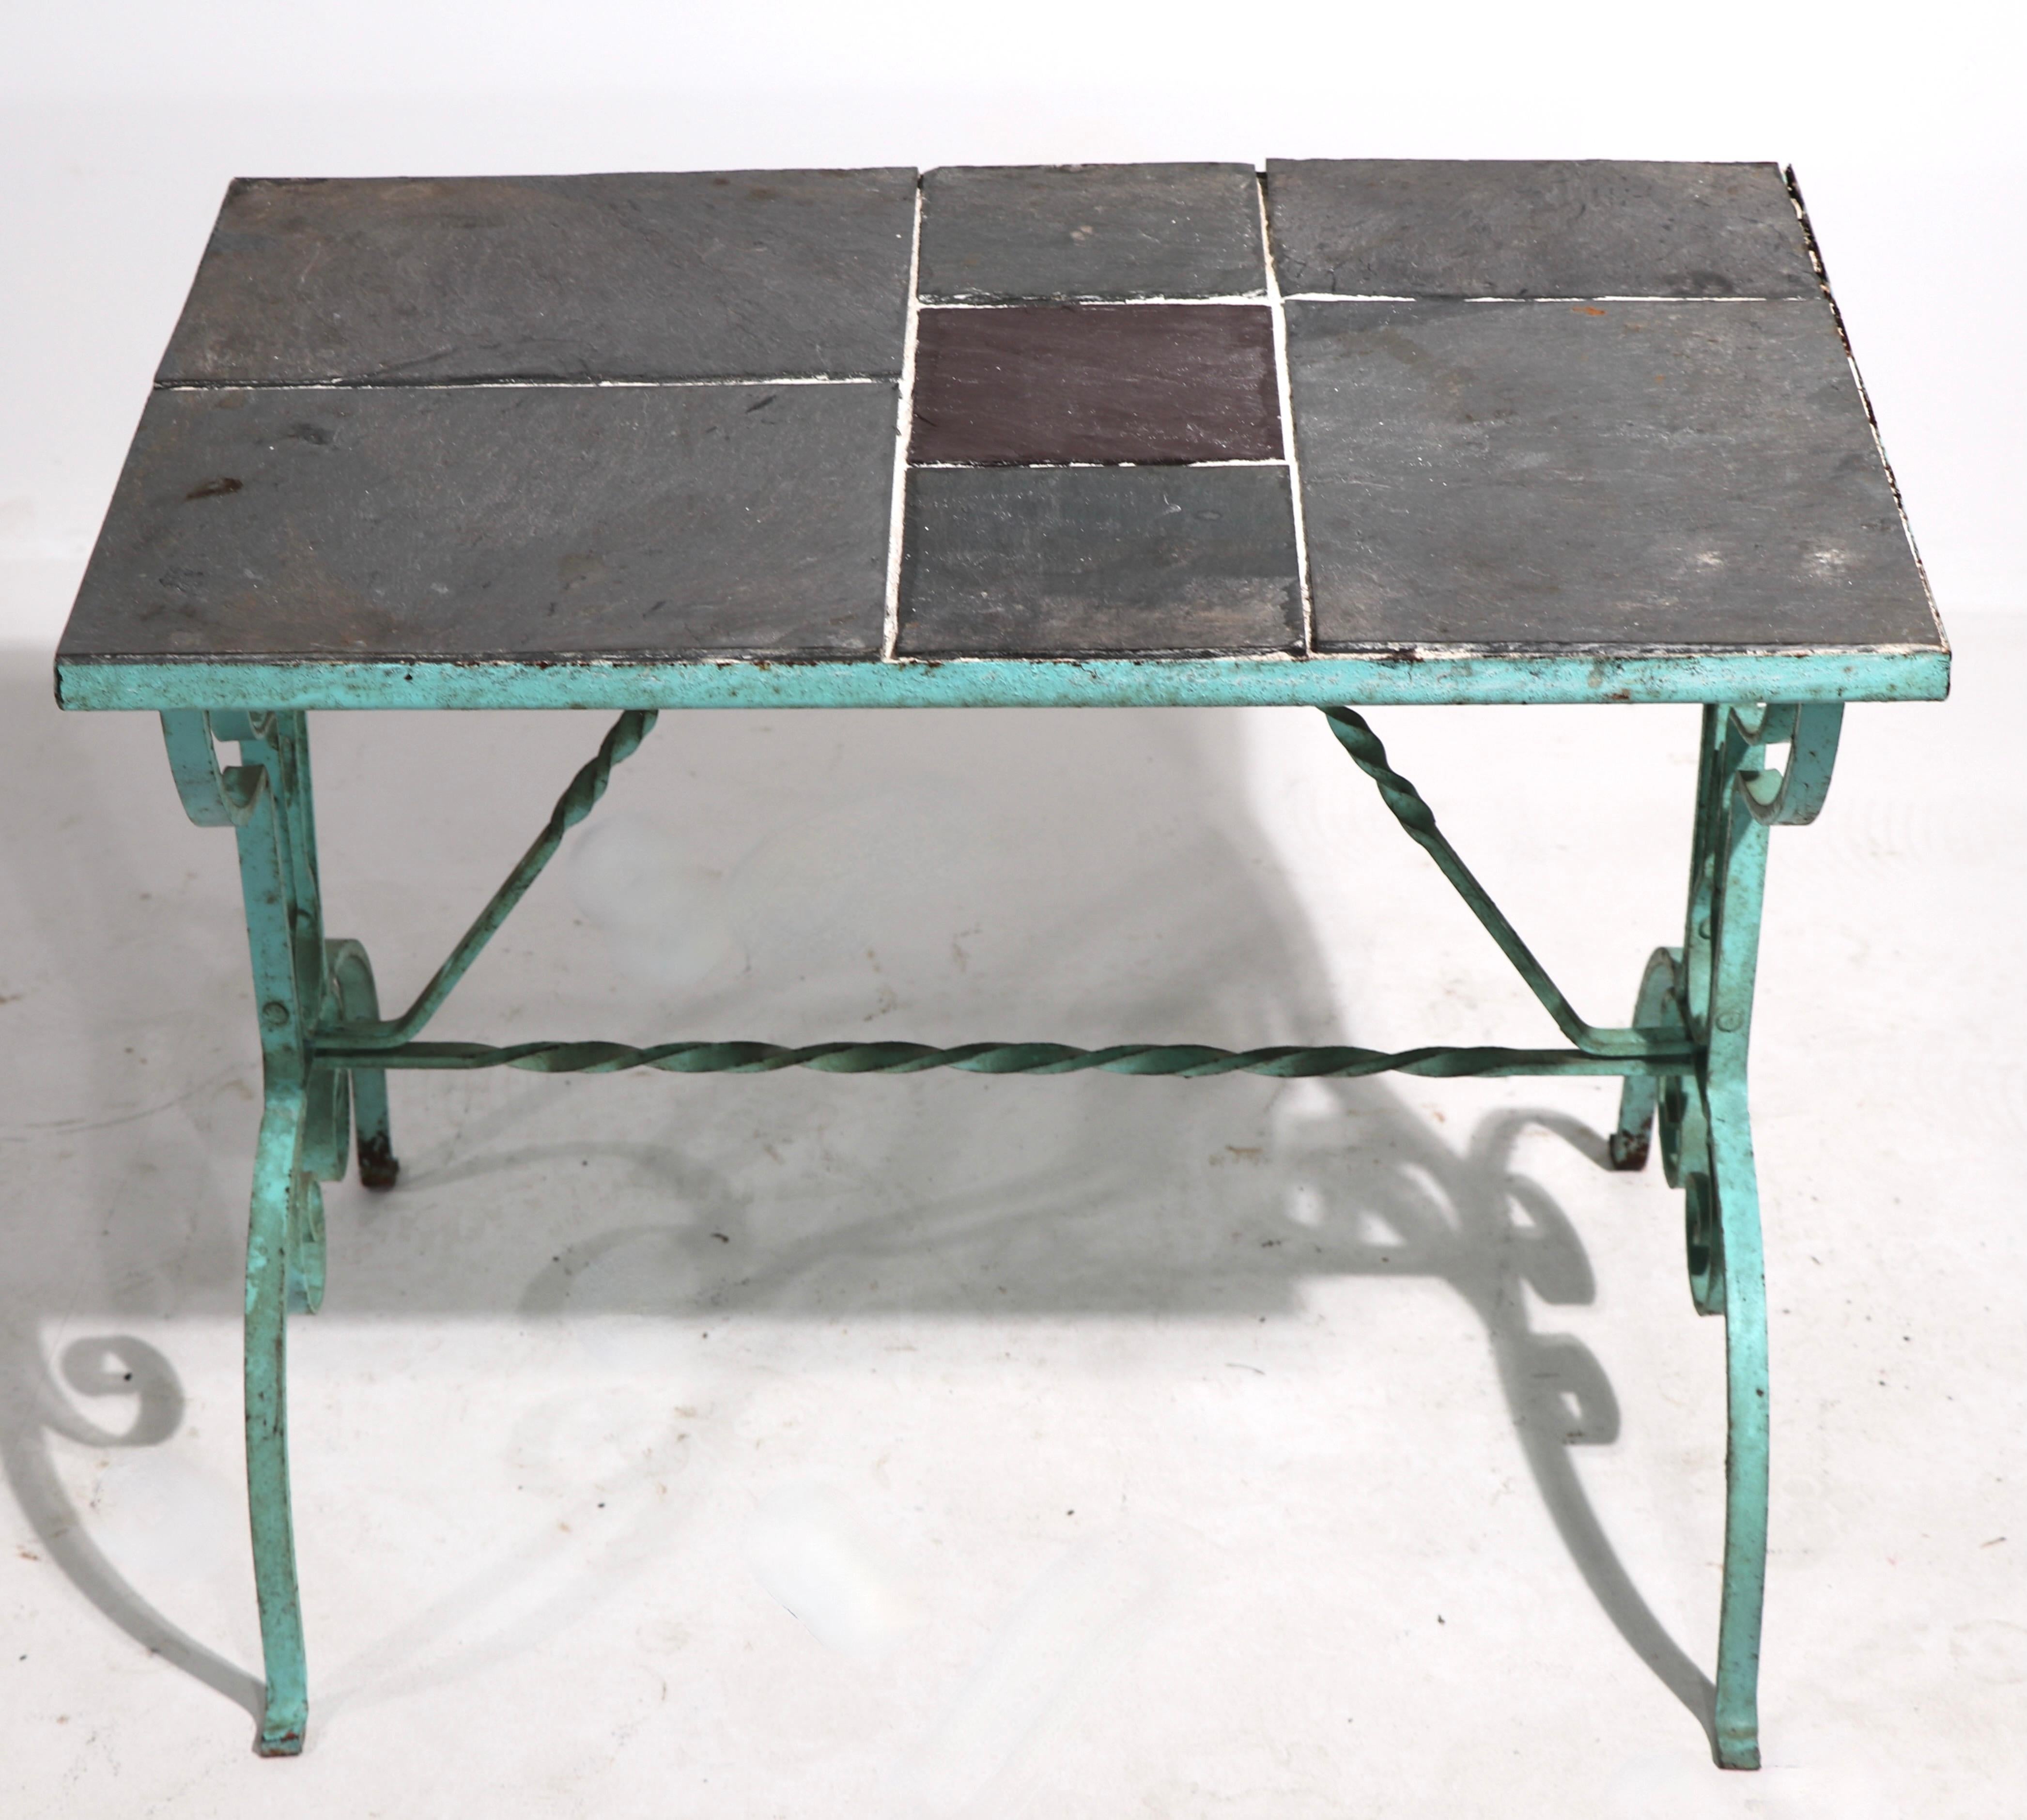 20th Century Art Deco Arts and Crafts Wrought Iron and Slate Garden Patio Table